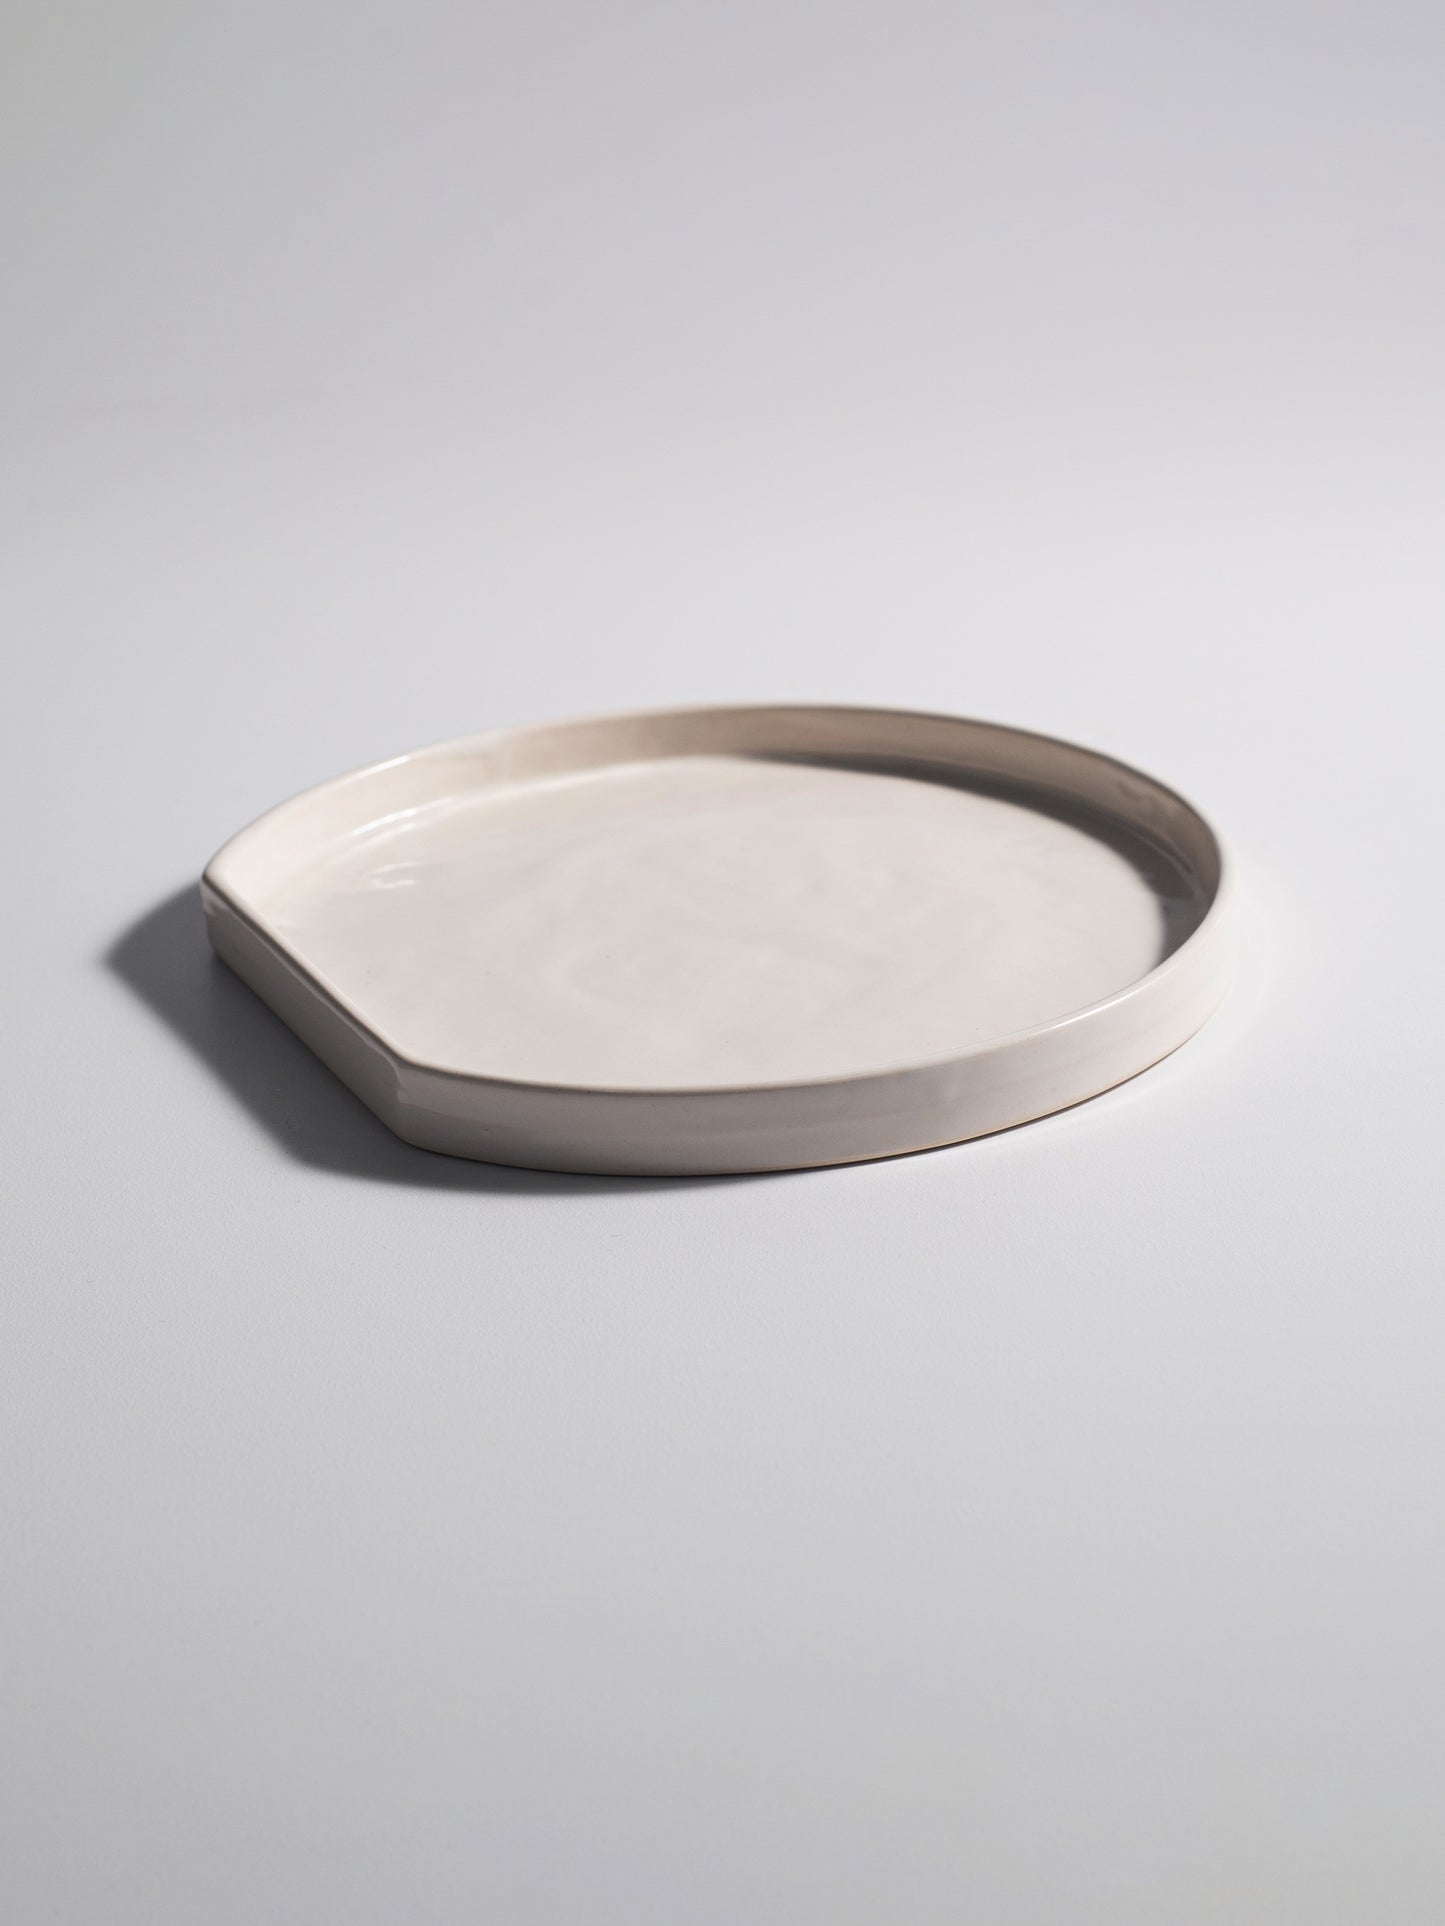 Trimmed plate 26 cm